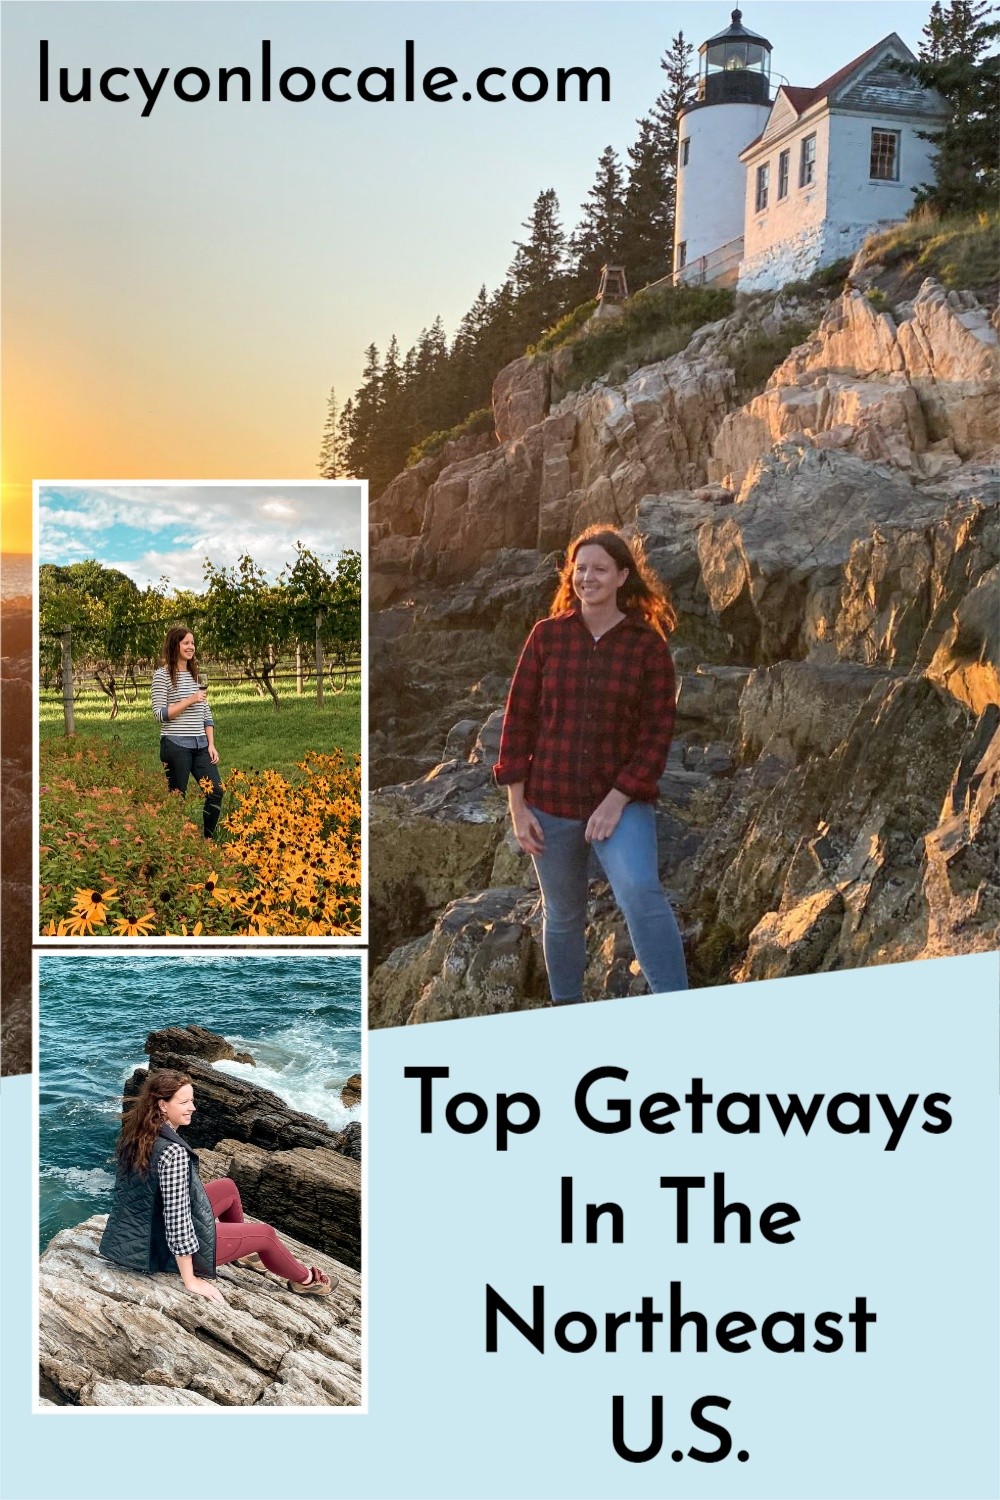 The best getaways in the Northeast United States